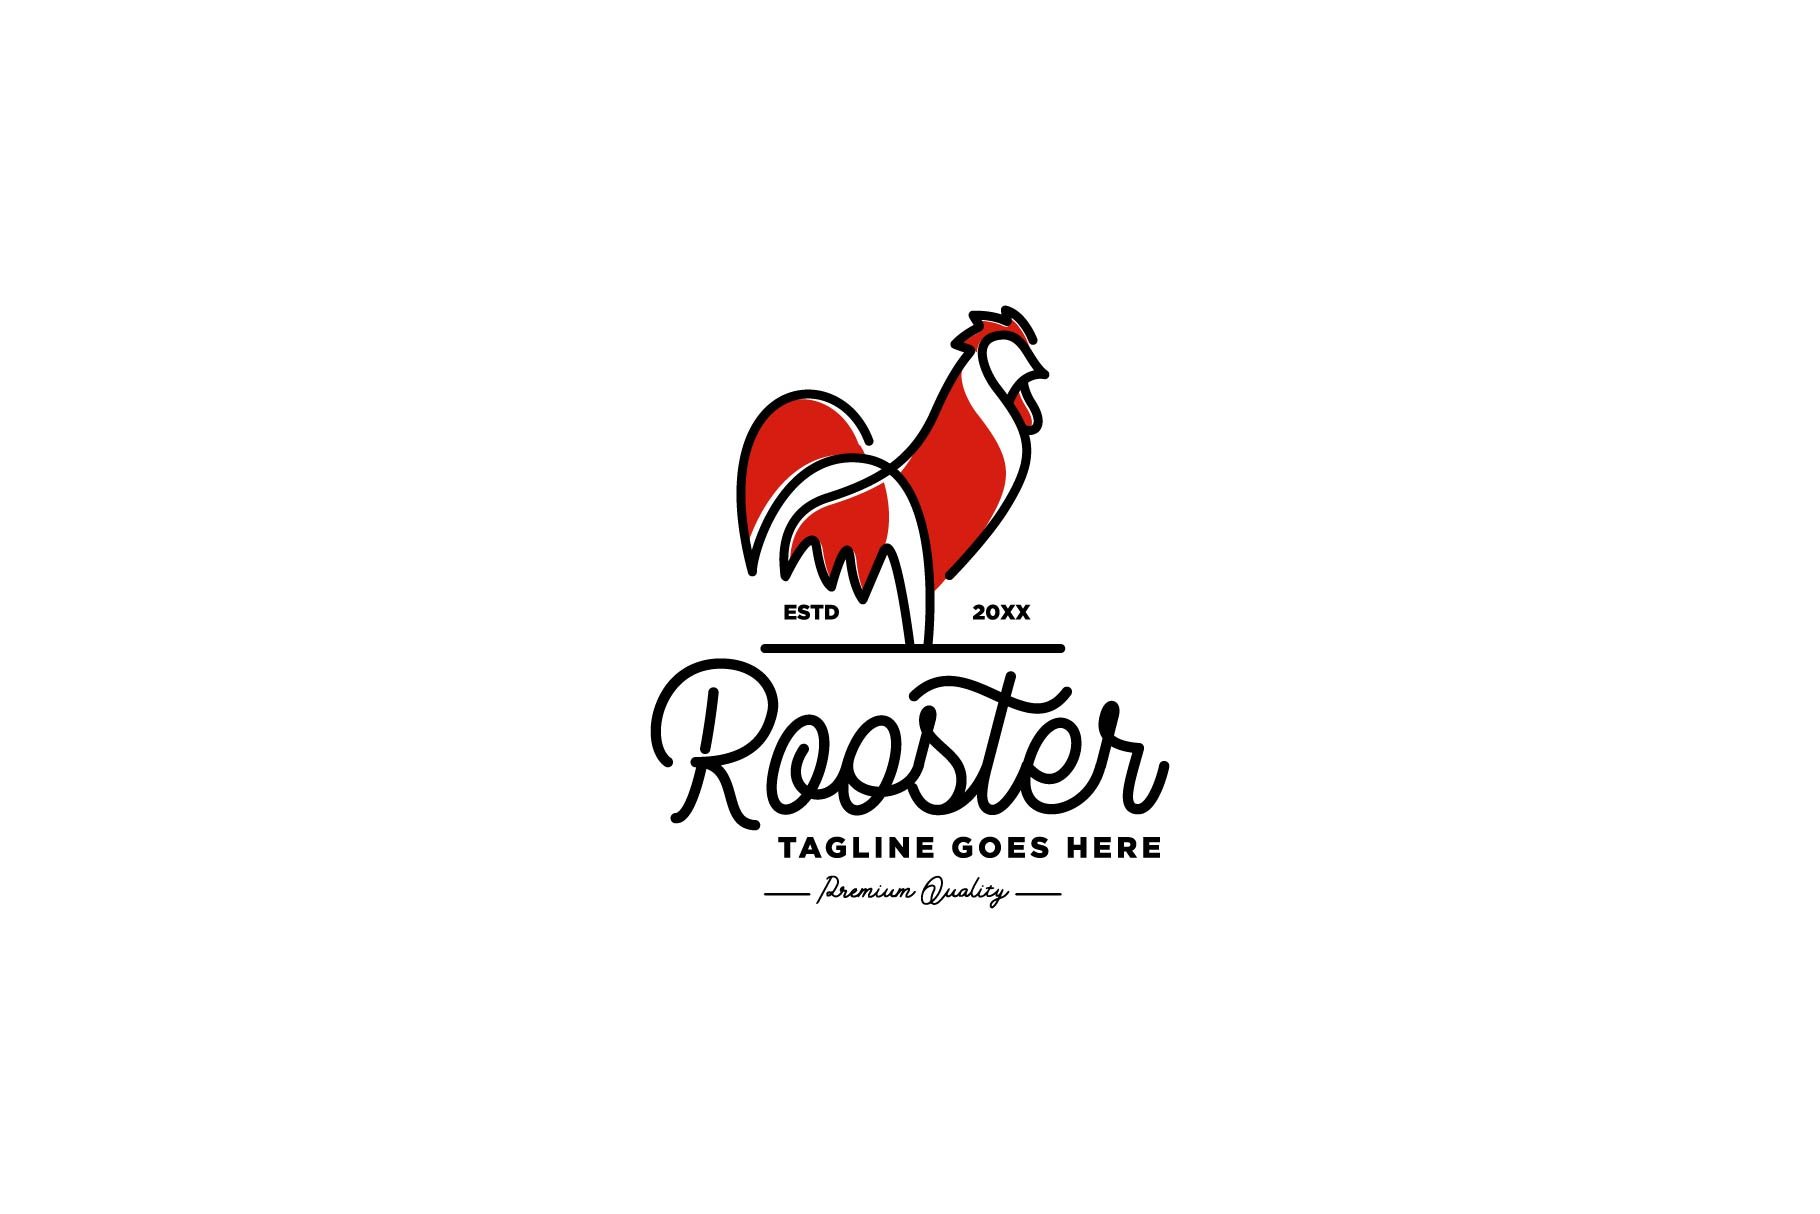 monoline rooster logo cover image.